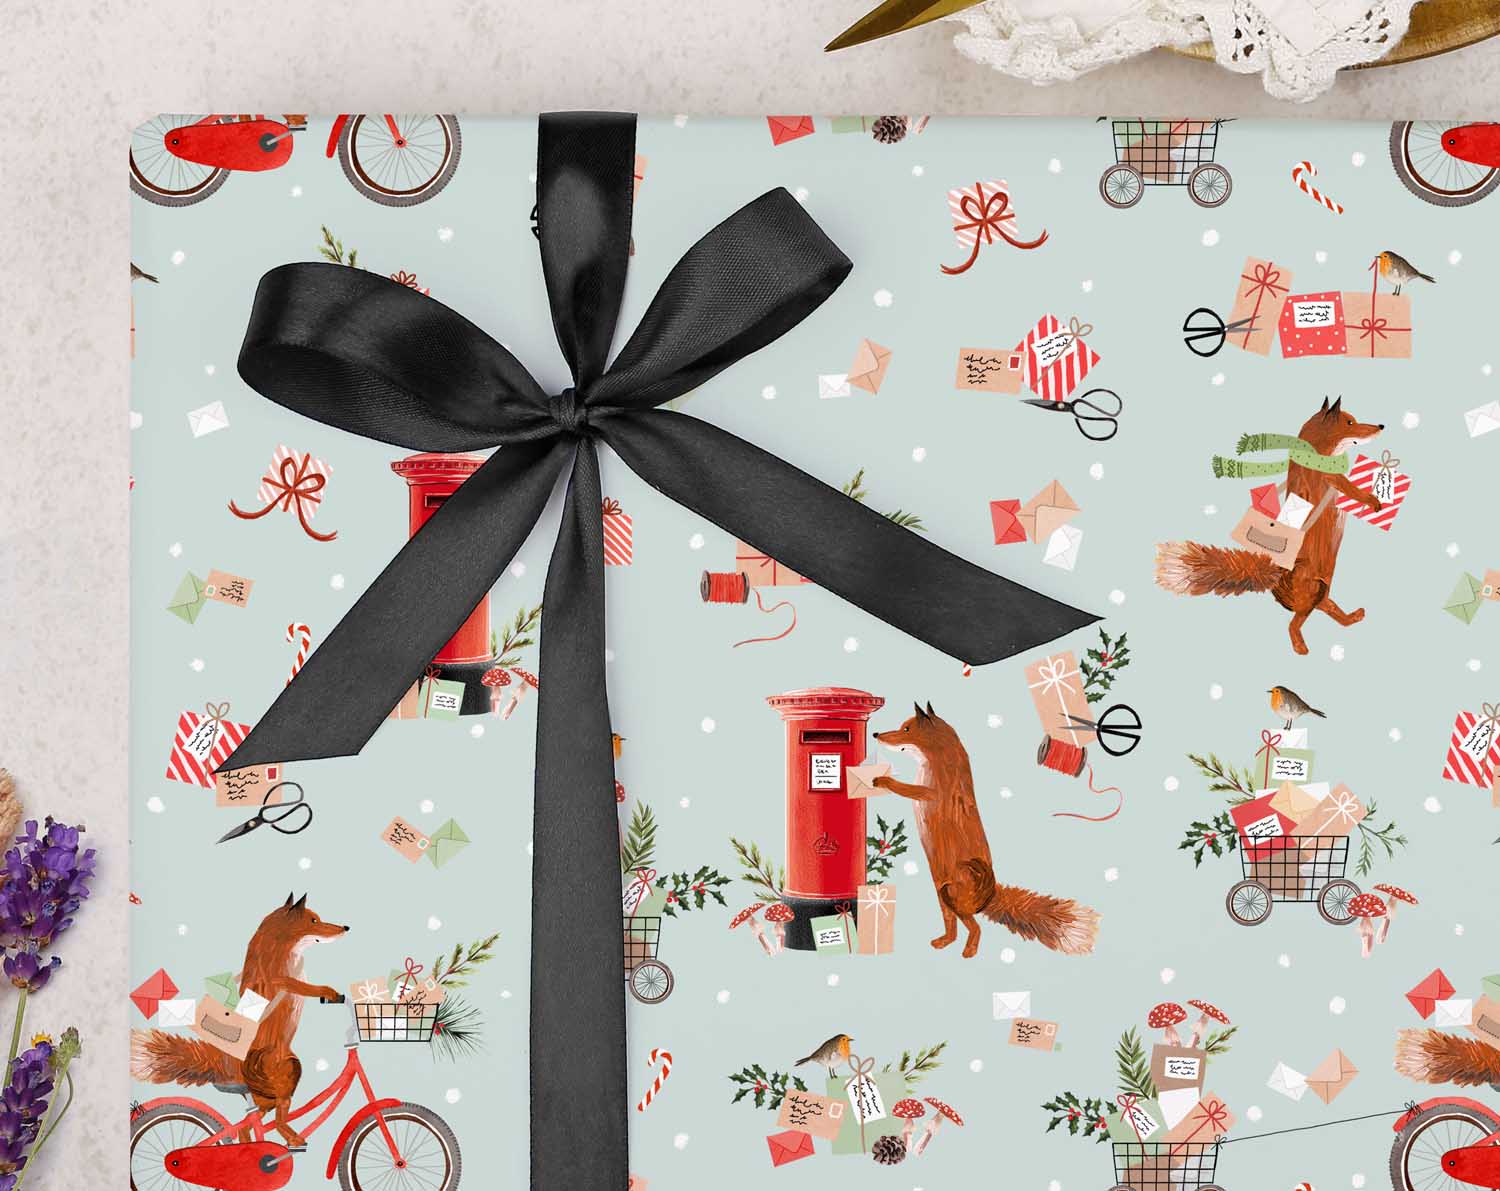 festive Christmas wrapping paper is filled with whimsical fox postman collecting mail and posting letters